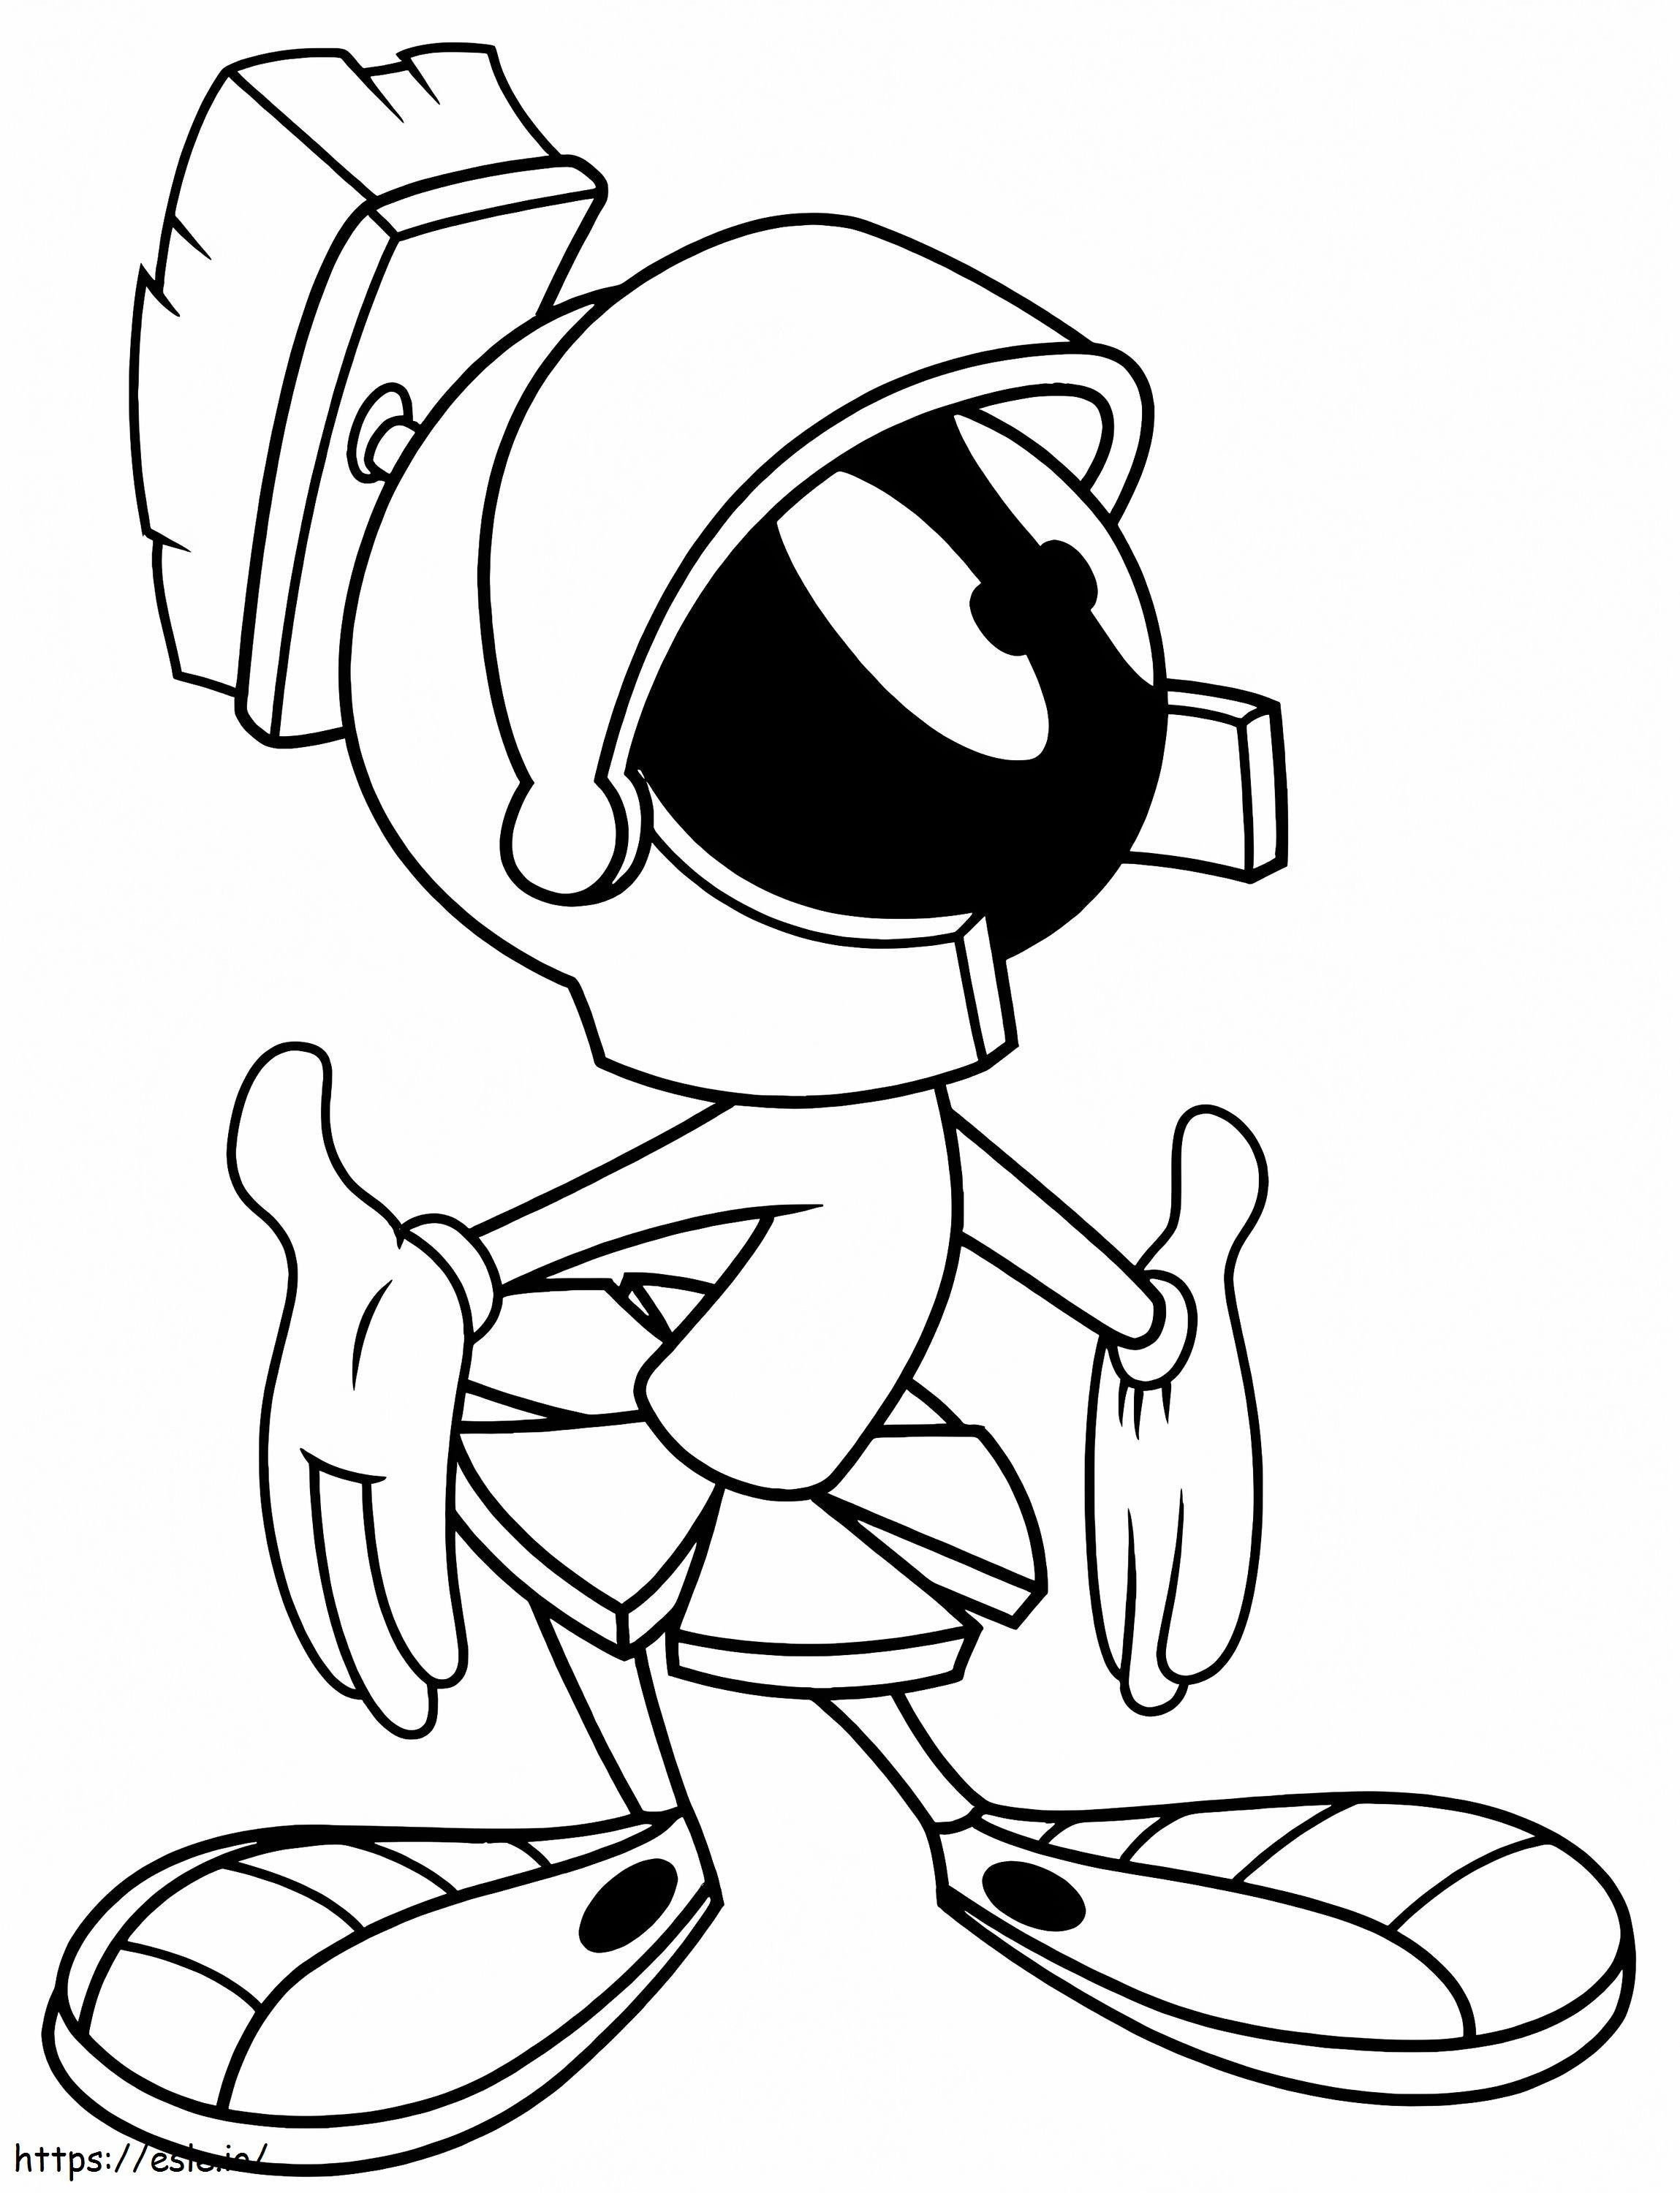 Printable Marvin The Martian coloring page